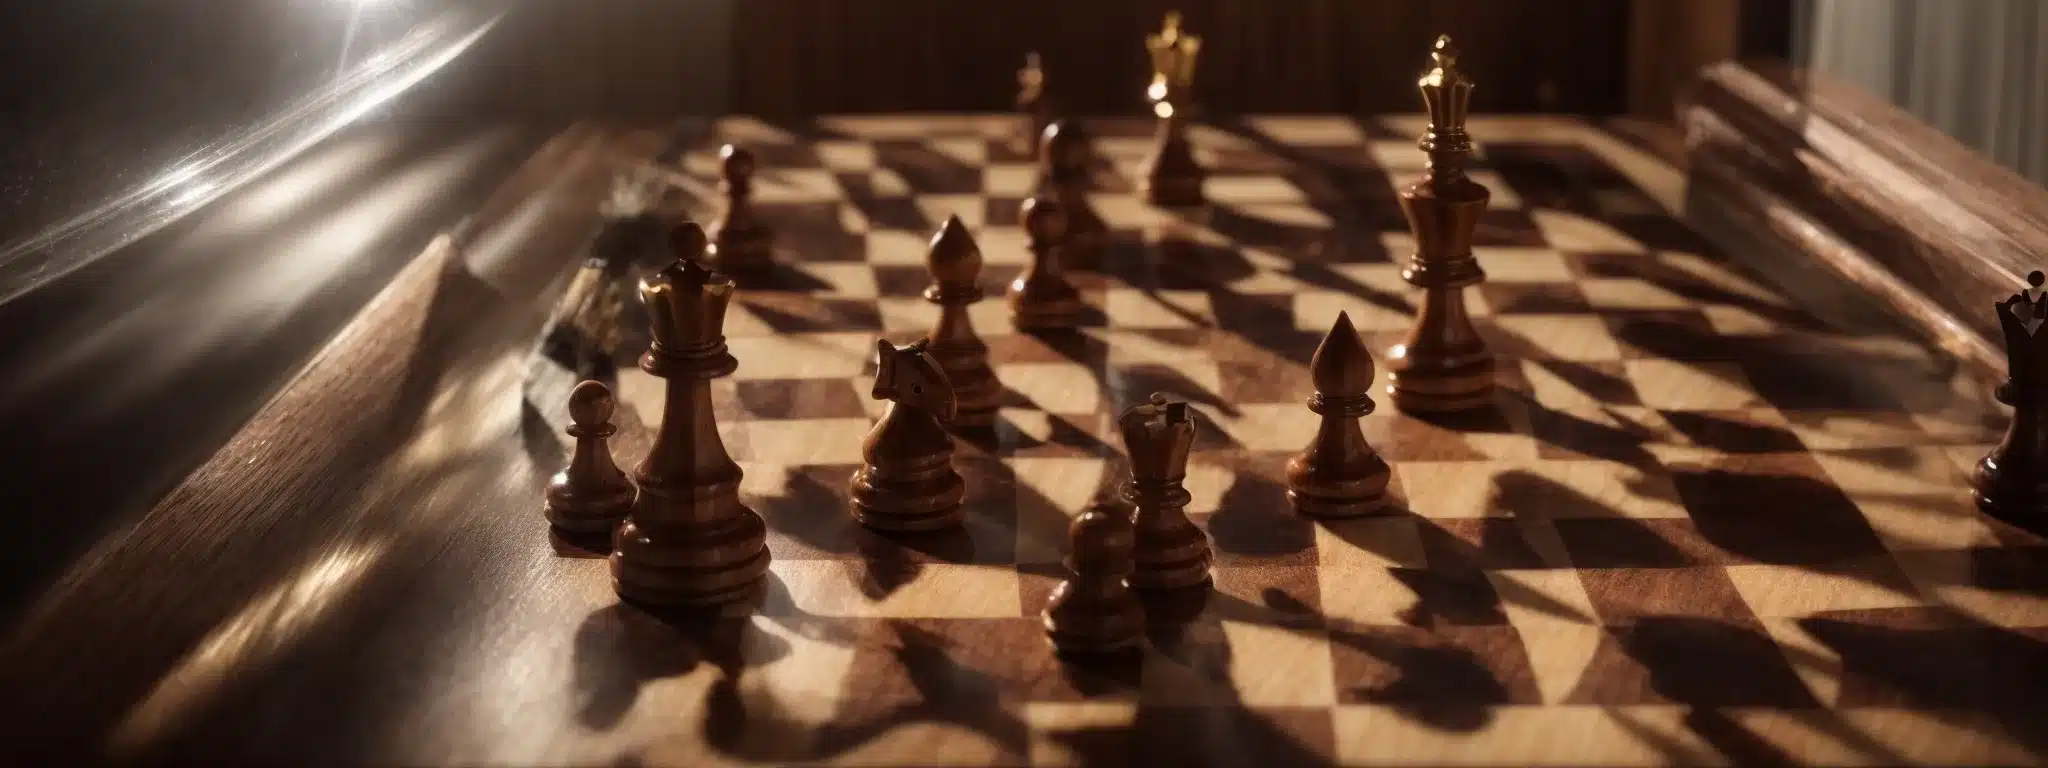 A Chessboard With Distinctively Carved Pieces Under A Spotlight, Symbolizing Strategic Competition.